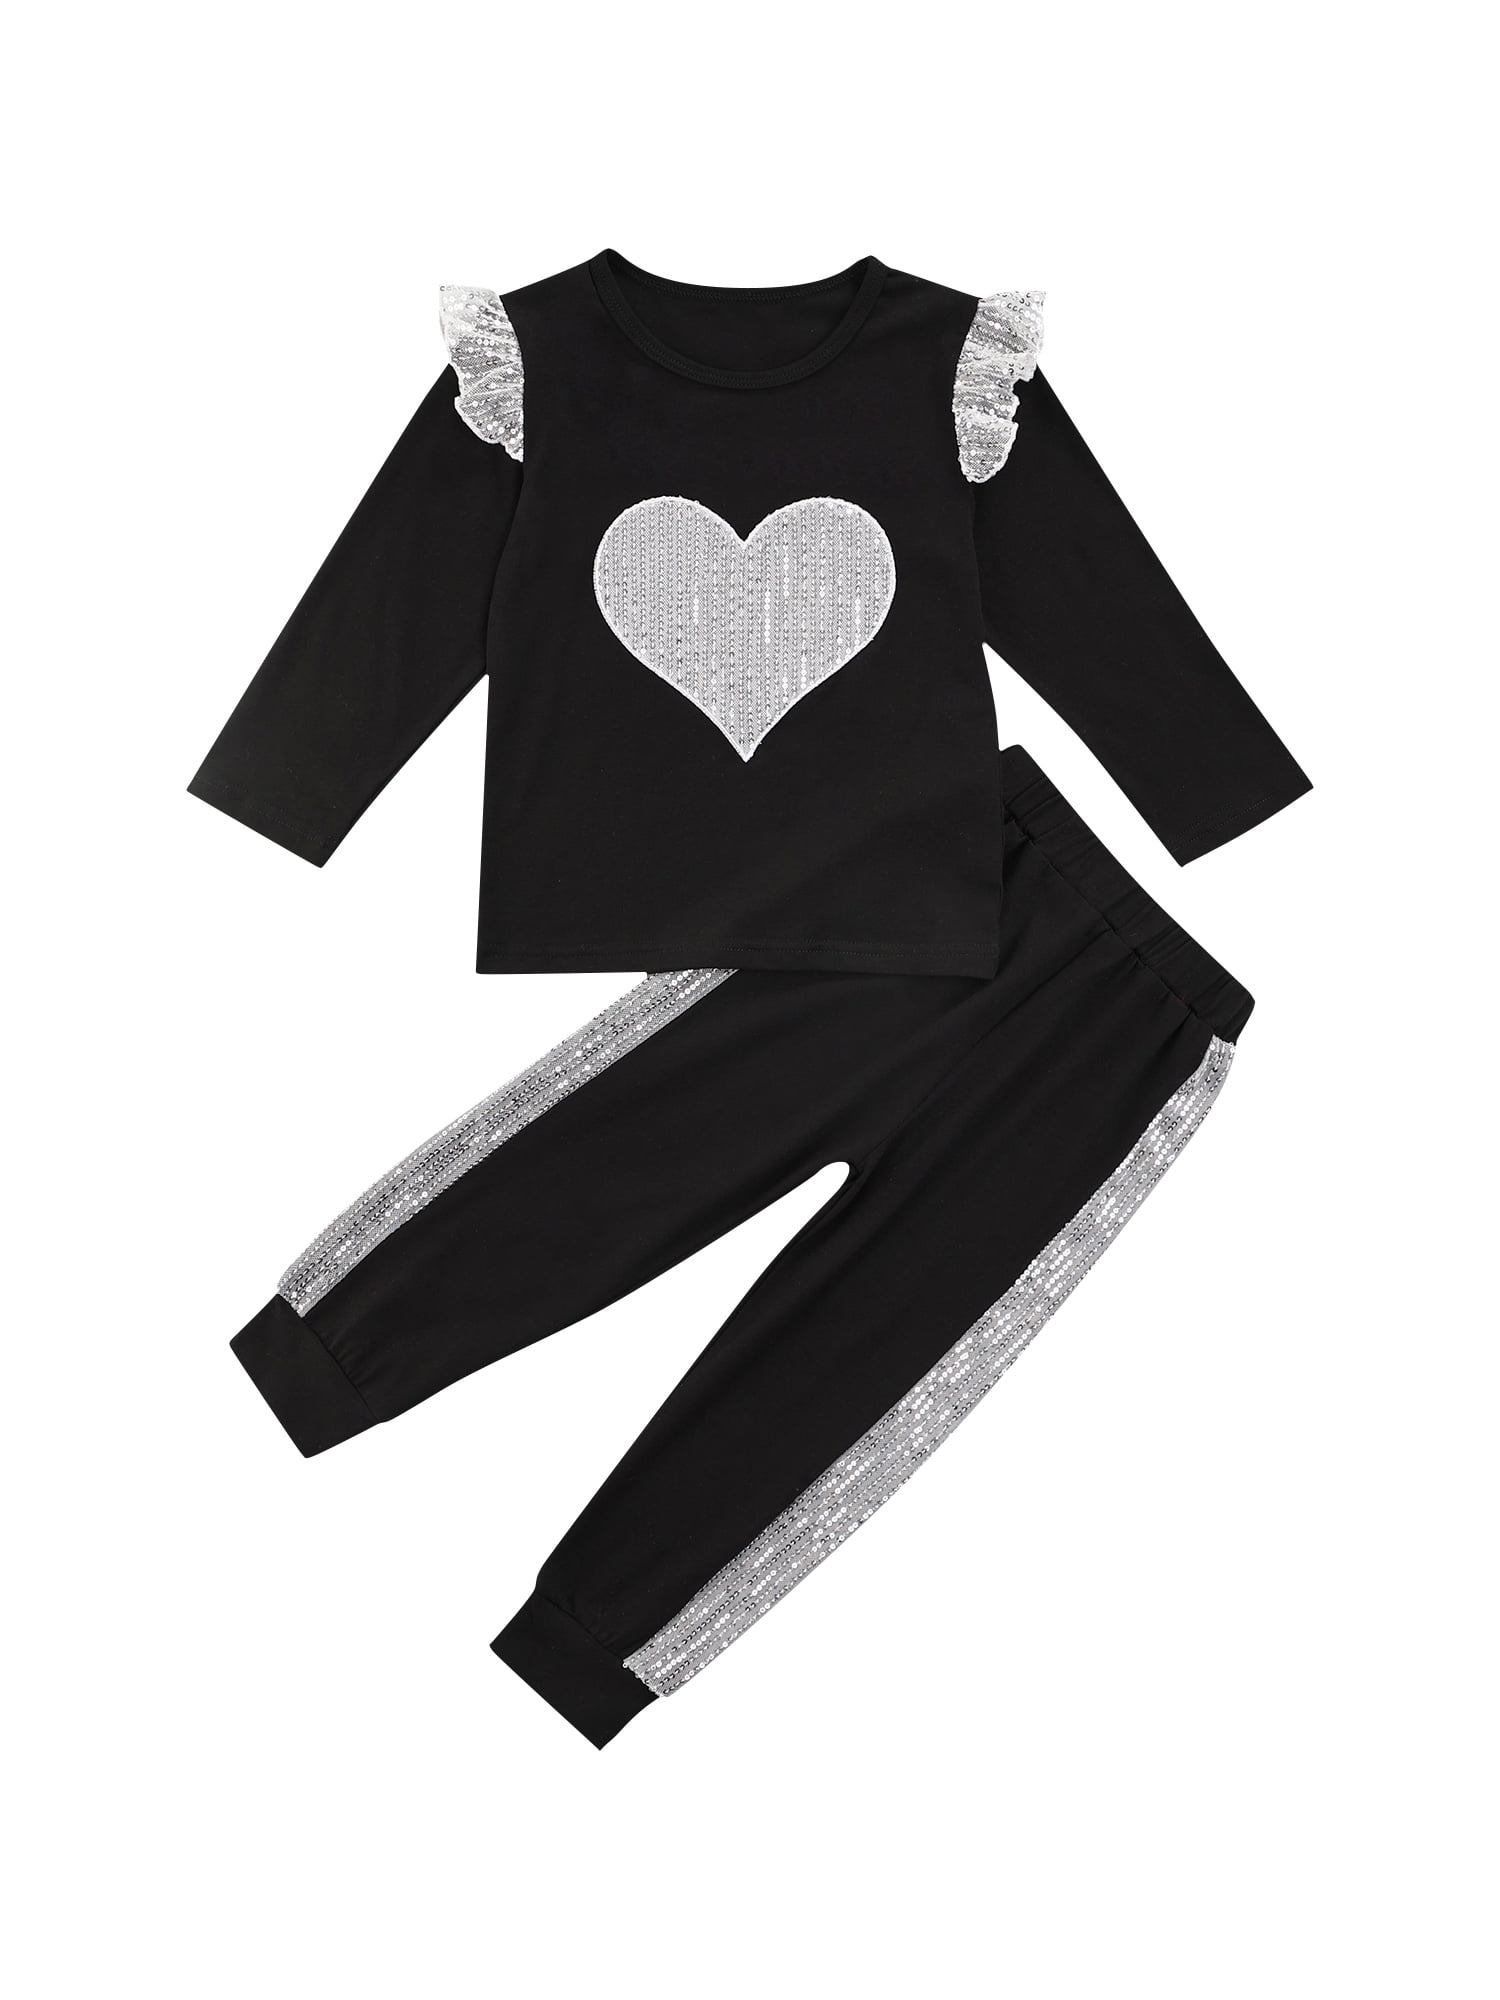 Pants Set Outfits Clothes Kids Toddler Baby Girl T Shirt Casual Tracksuit Tops